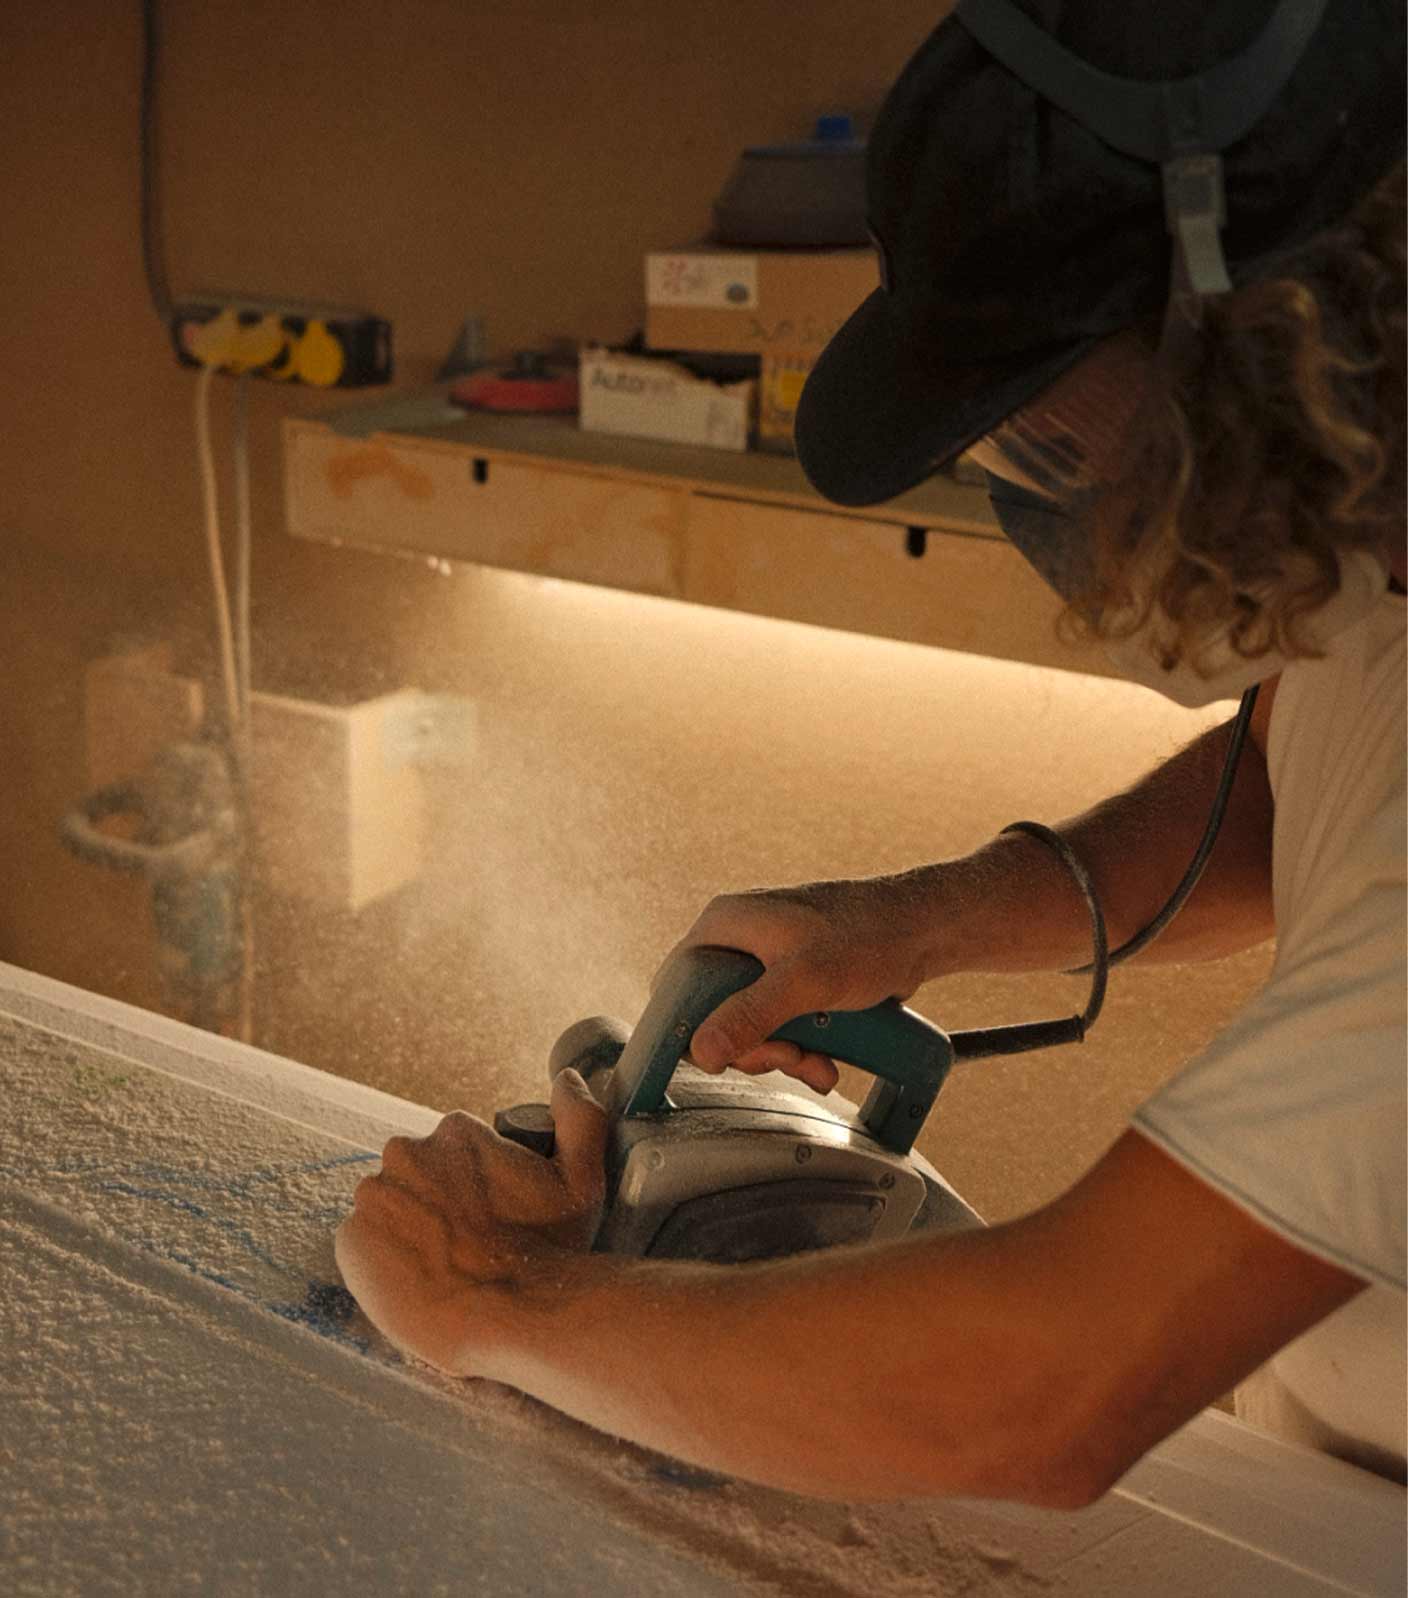 Surfboard shaper Phillip Tritthart shaping a surfboard wearing a black cap and a white t-shirt in the workshop with dust flying around.